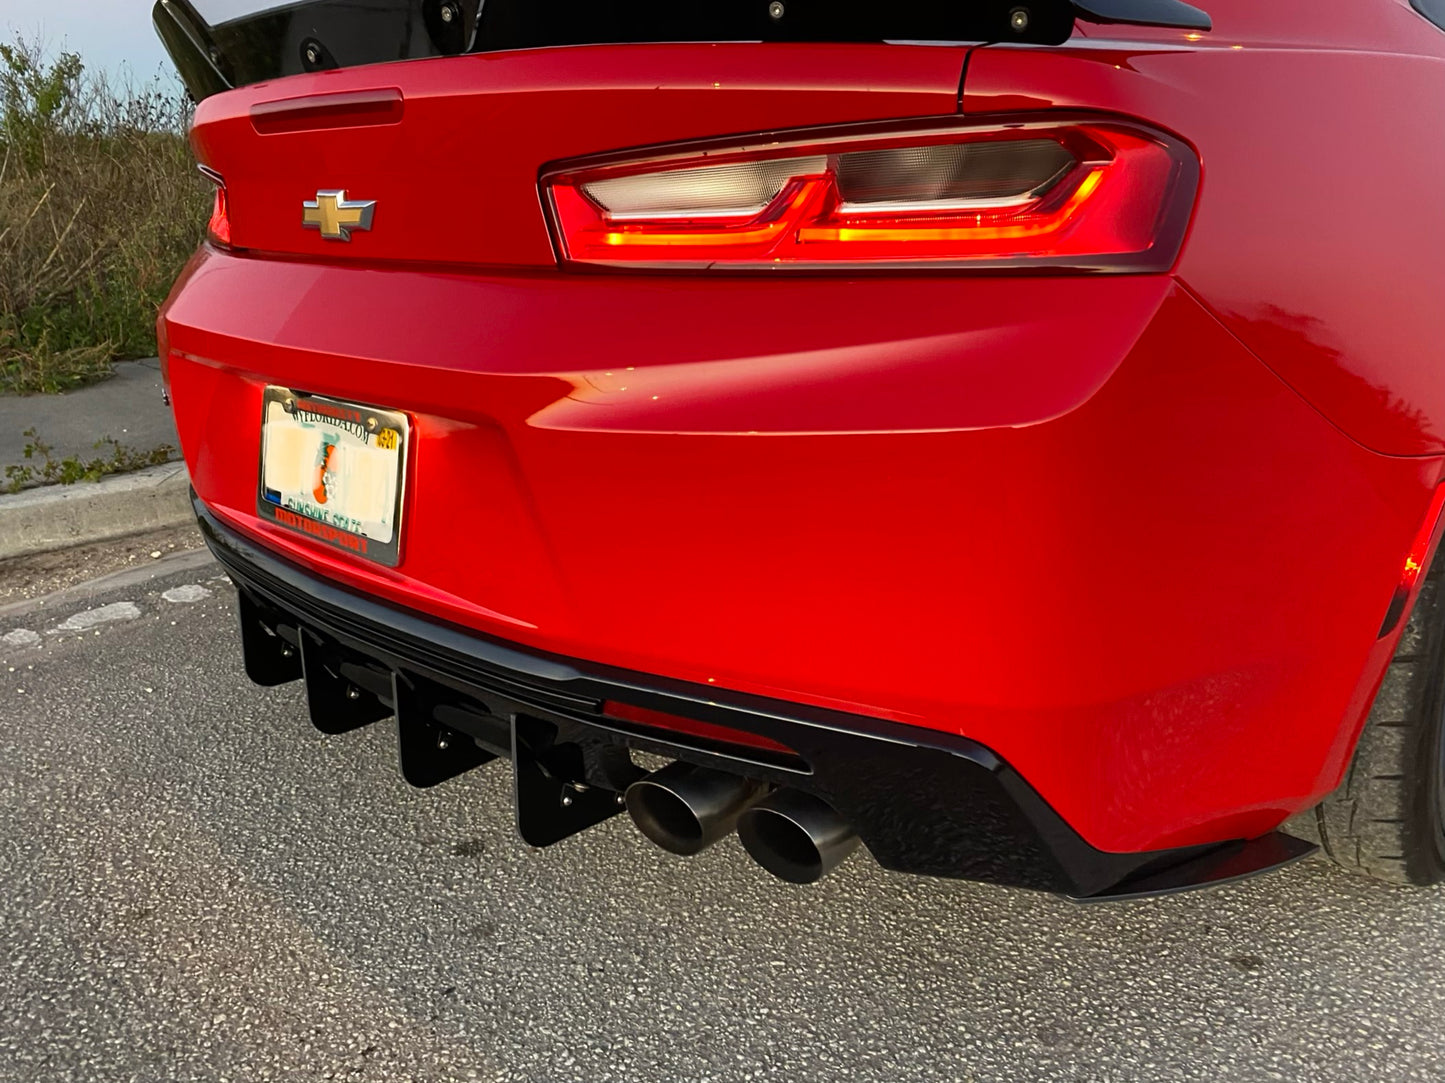 Full Rear Diffuser V7 - 6 Piece Kit  compatible with Chevy Camaro SS ZL1 16-18